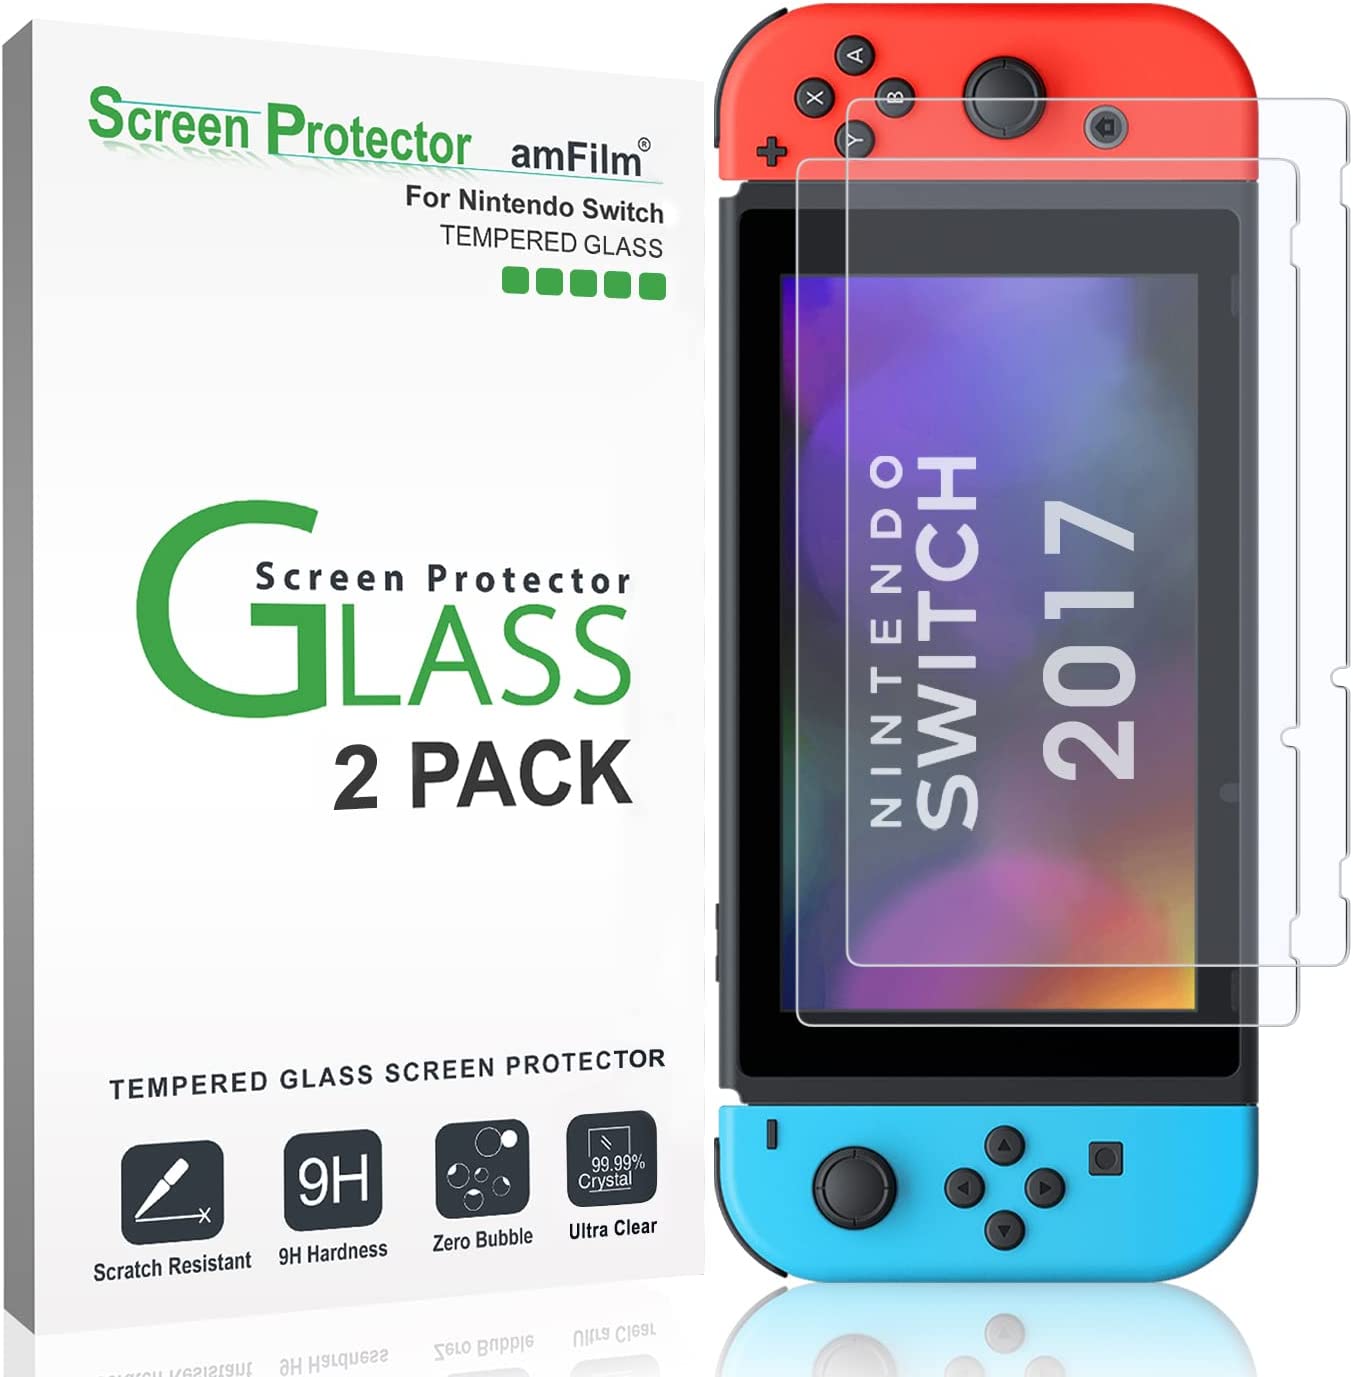 amFilm Switch (2017) Screen Protector 2-Pack